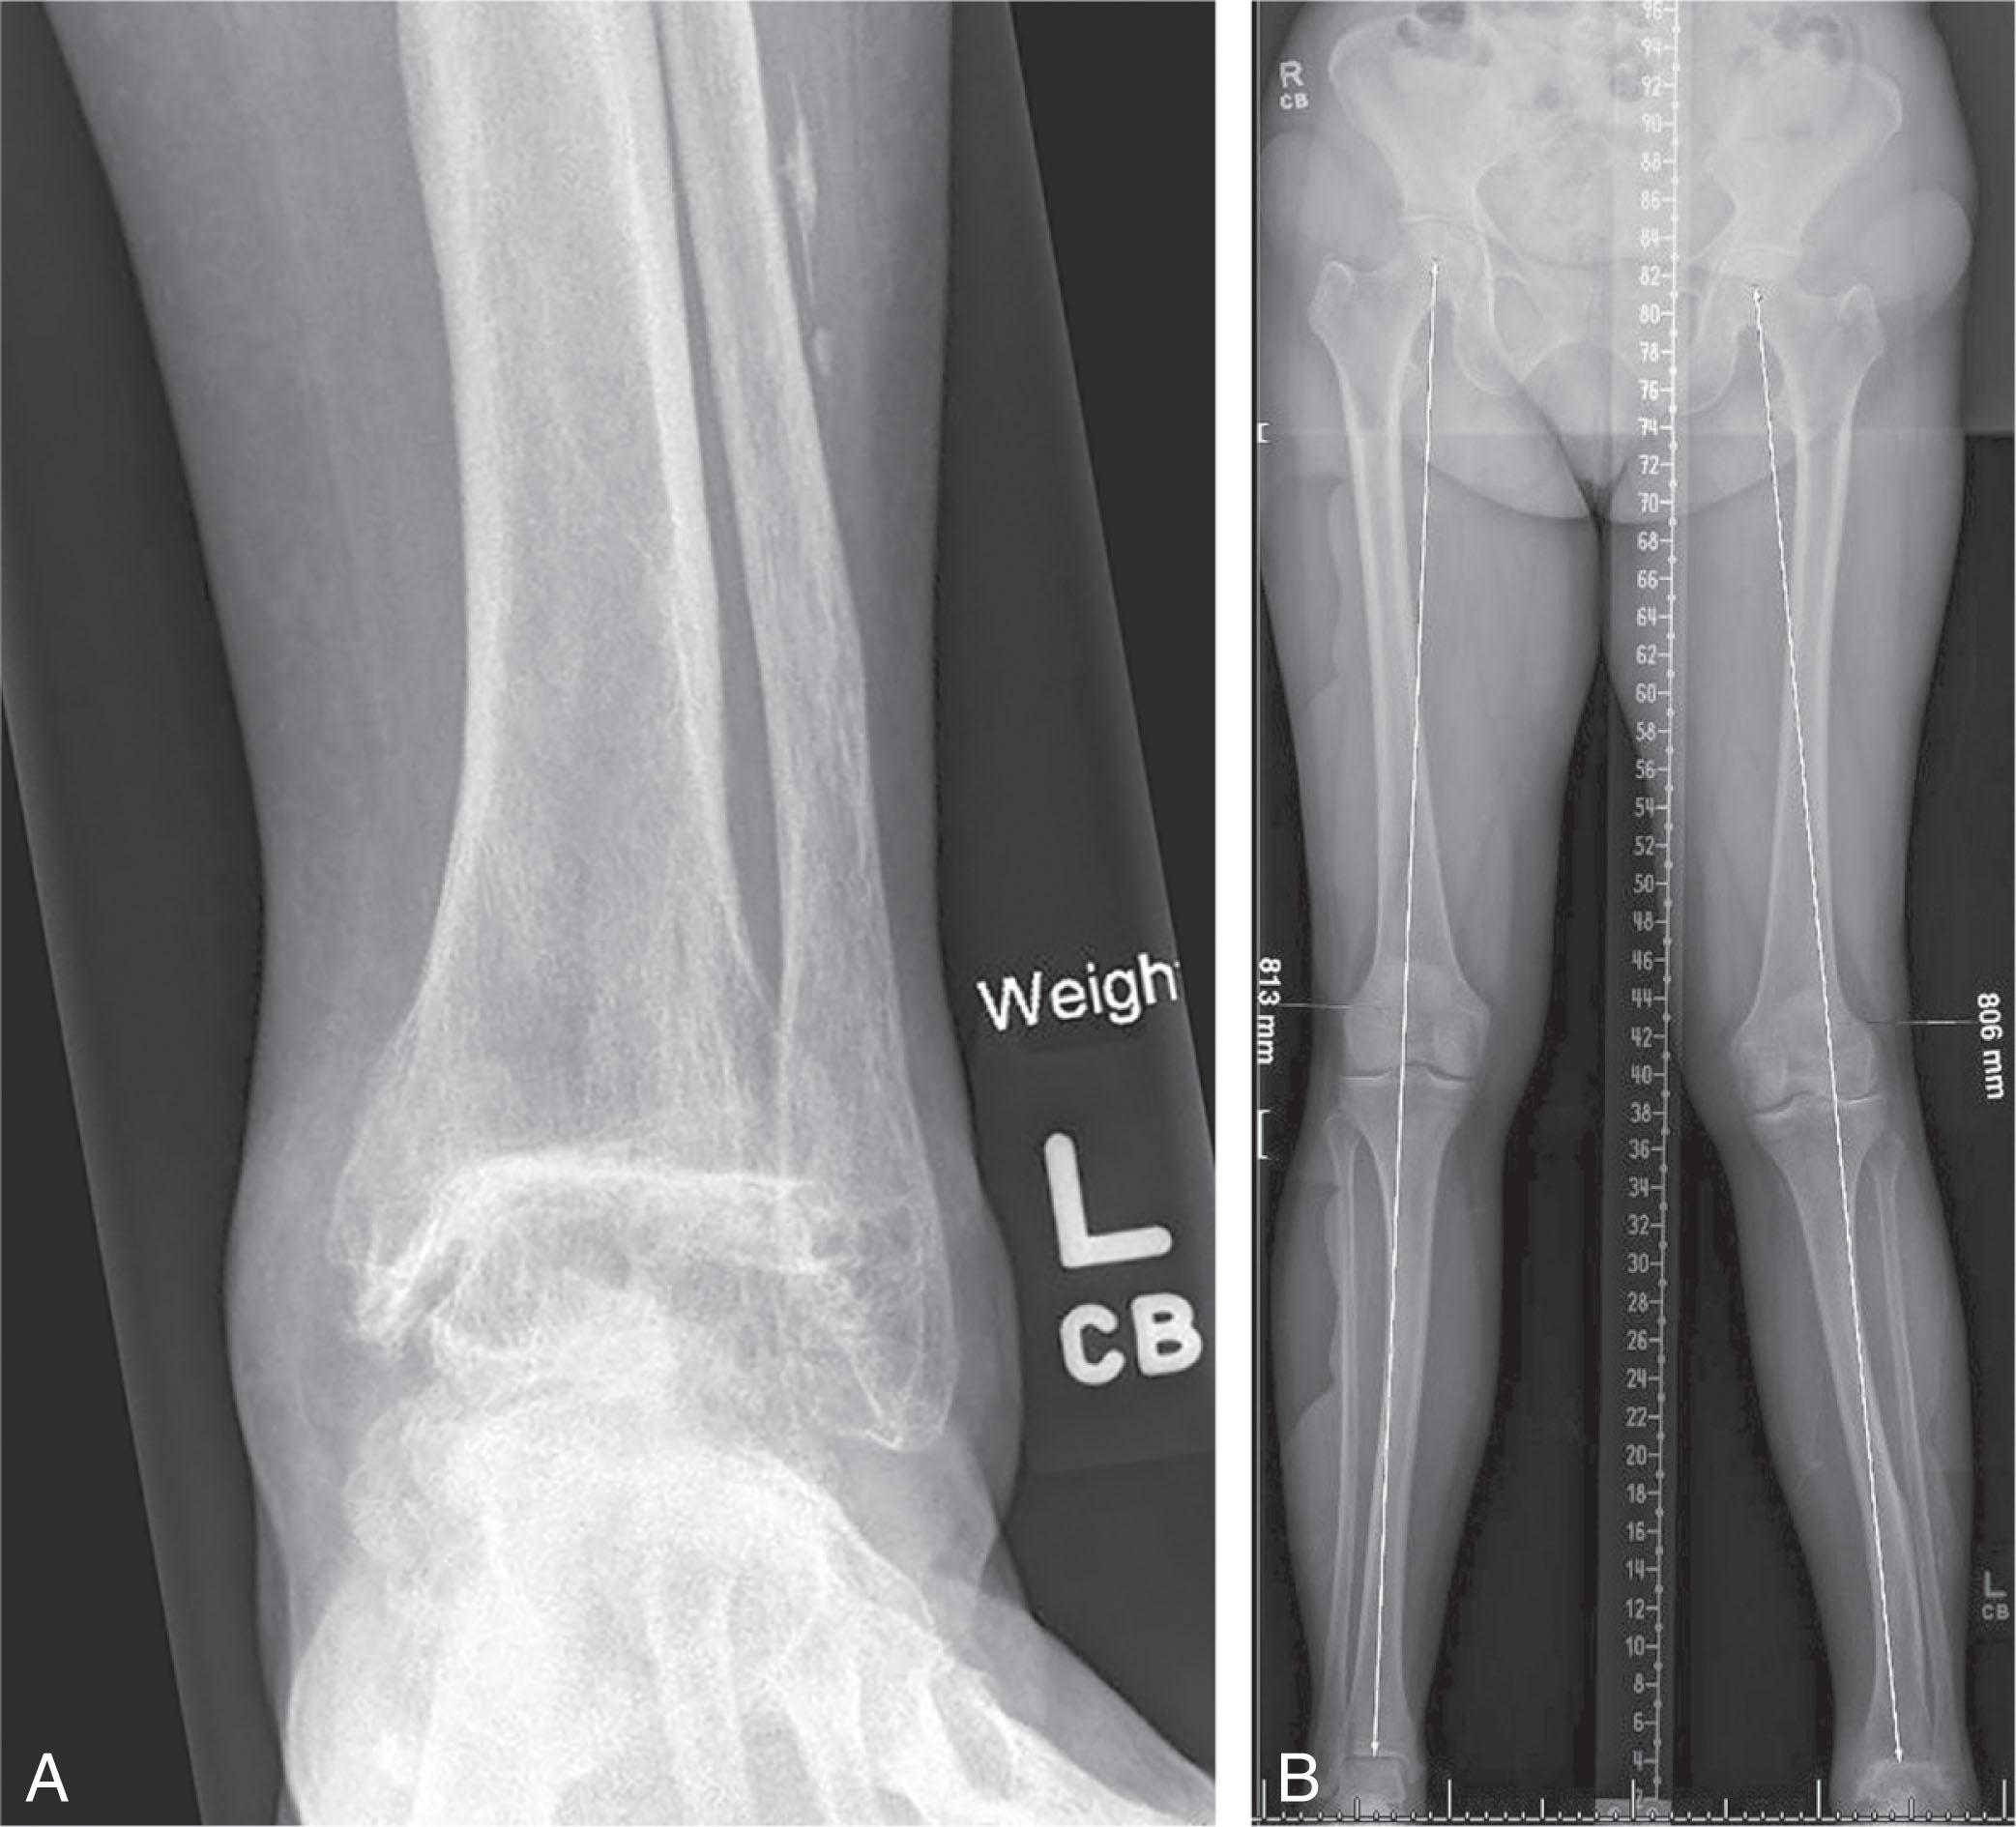 Fig. 22-6, A , The standard ankle radiograph may miss bone and joint deformity above the ankle. B , The long-leg alignment view is taken with the patient standing and includes the pelvis, femurs, tibias, and ankles. Varus deformity of the tibia and genu valgum from lateral knee osteoarthritis are revealed.